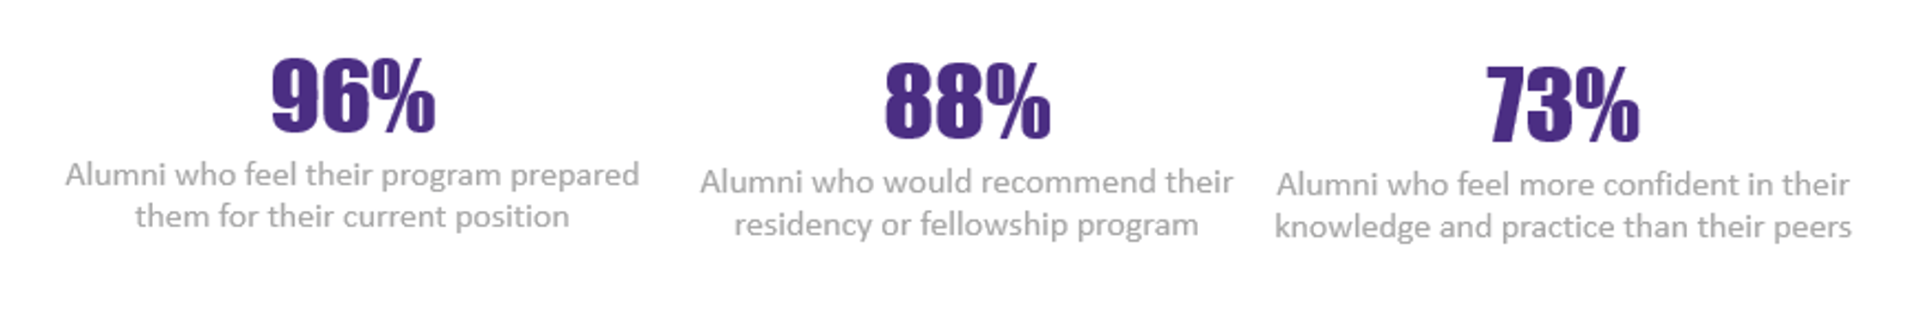 96% Alumni who feel their program prepared them for their current position; 88% Alumni who would recommend their residency or fellowship program; 73% Alumni who feel more confident in their knowledge and practice than their peers